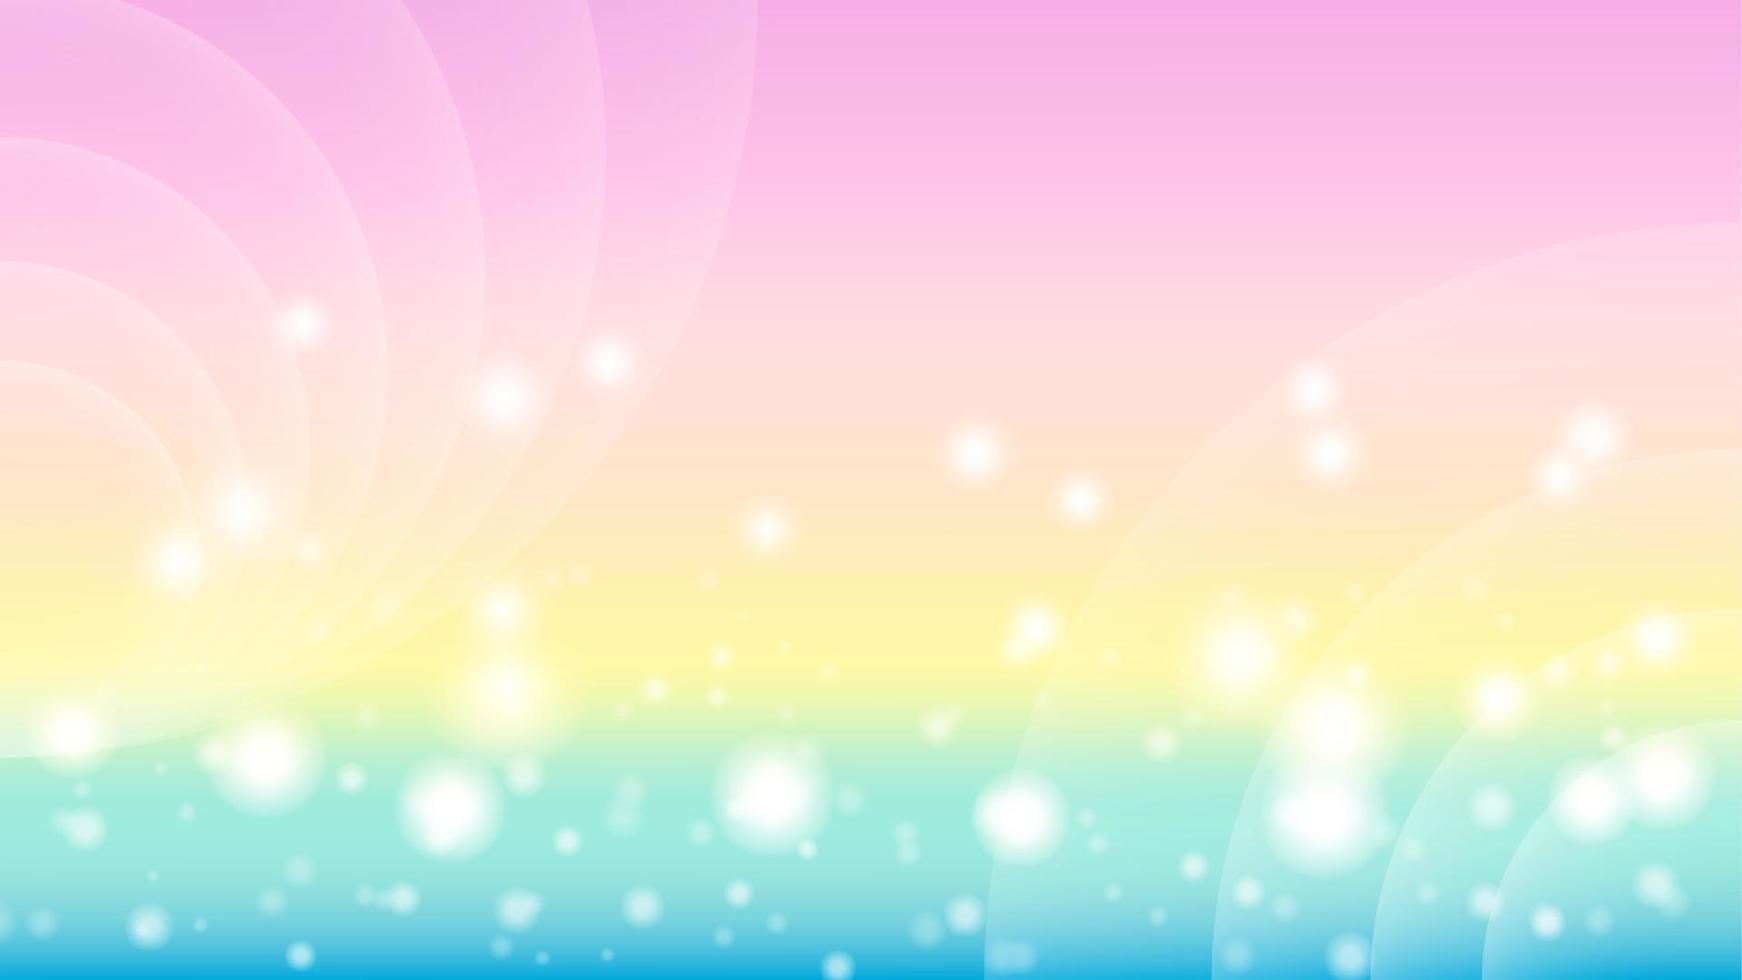 colorful bright pastel sparkling background vector